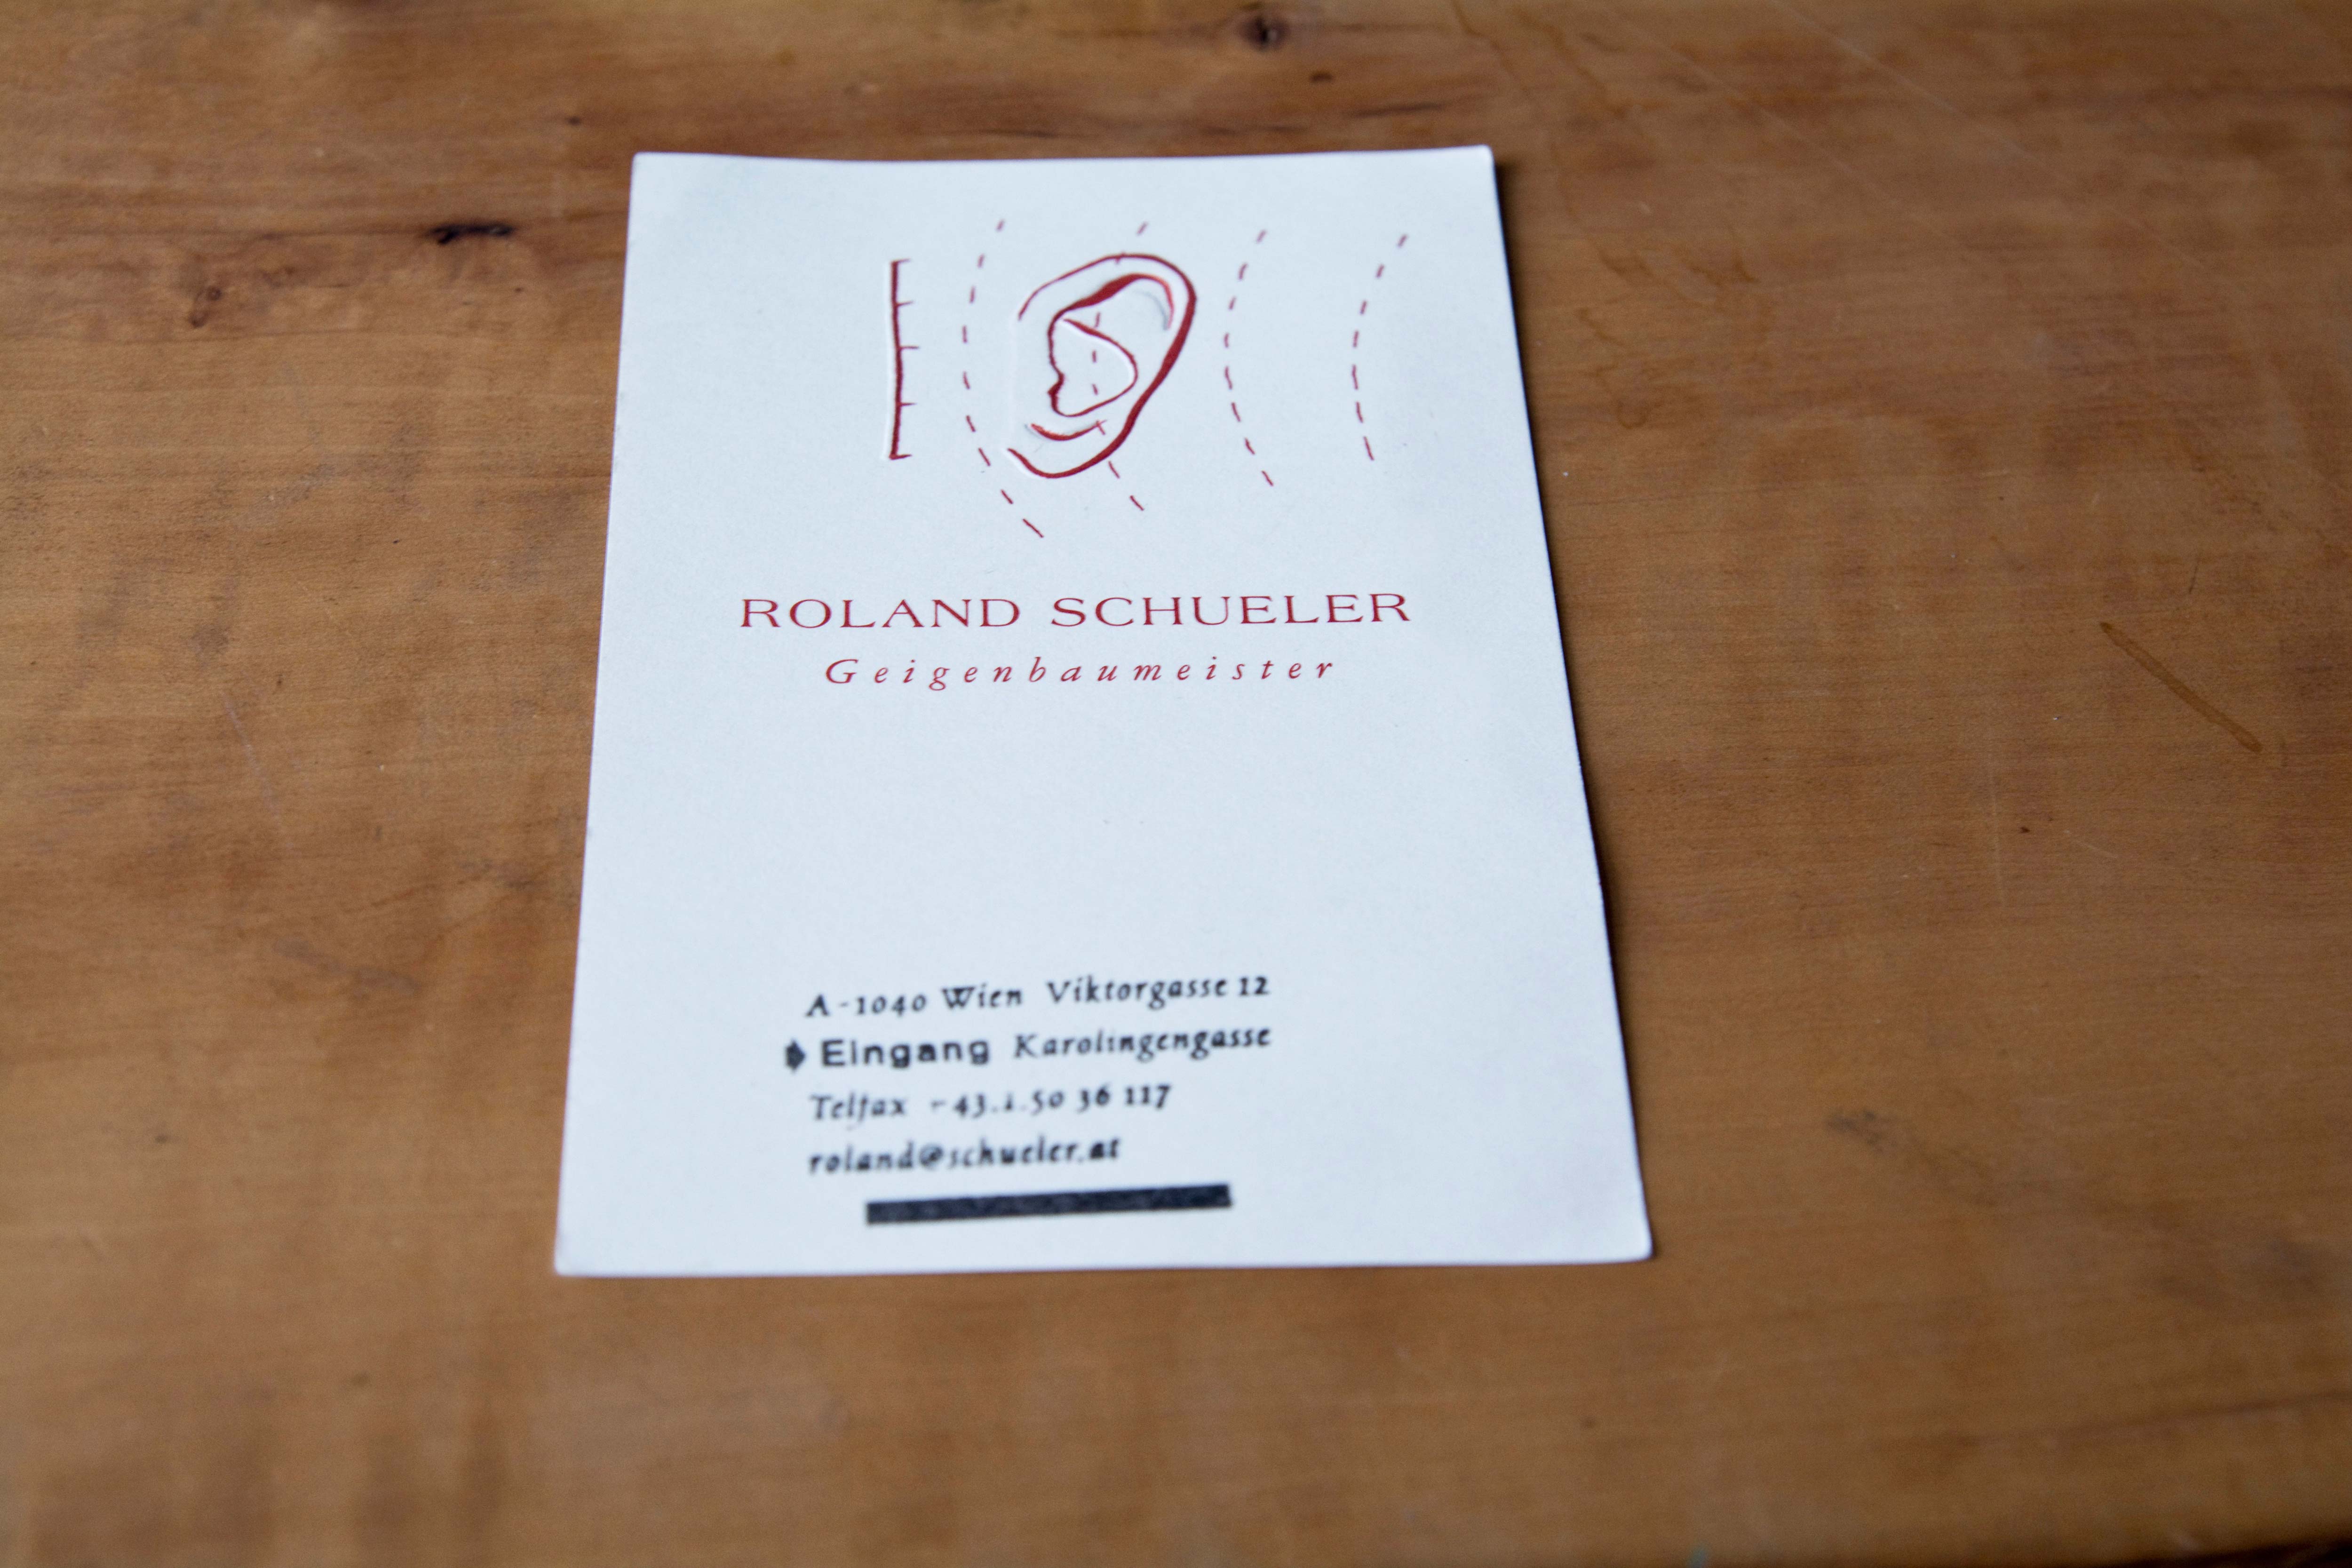 Card with partly embossed logo.